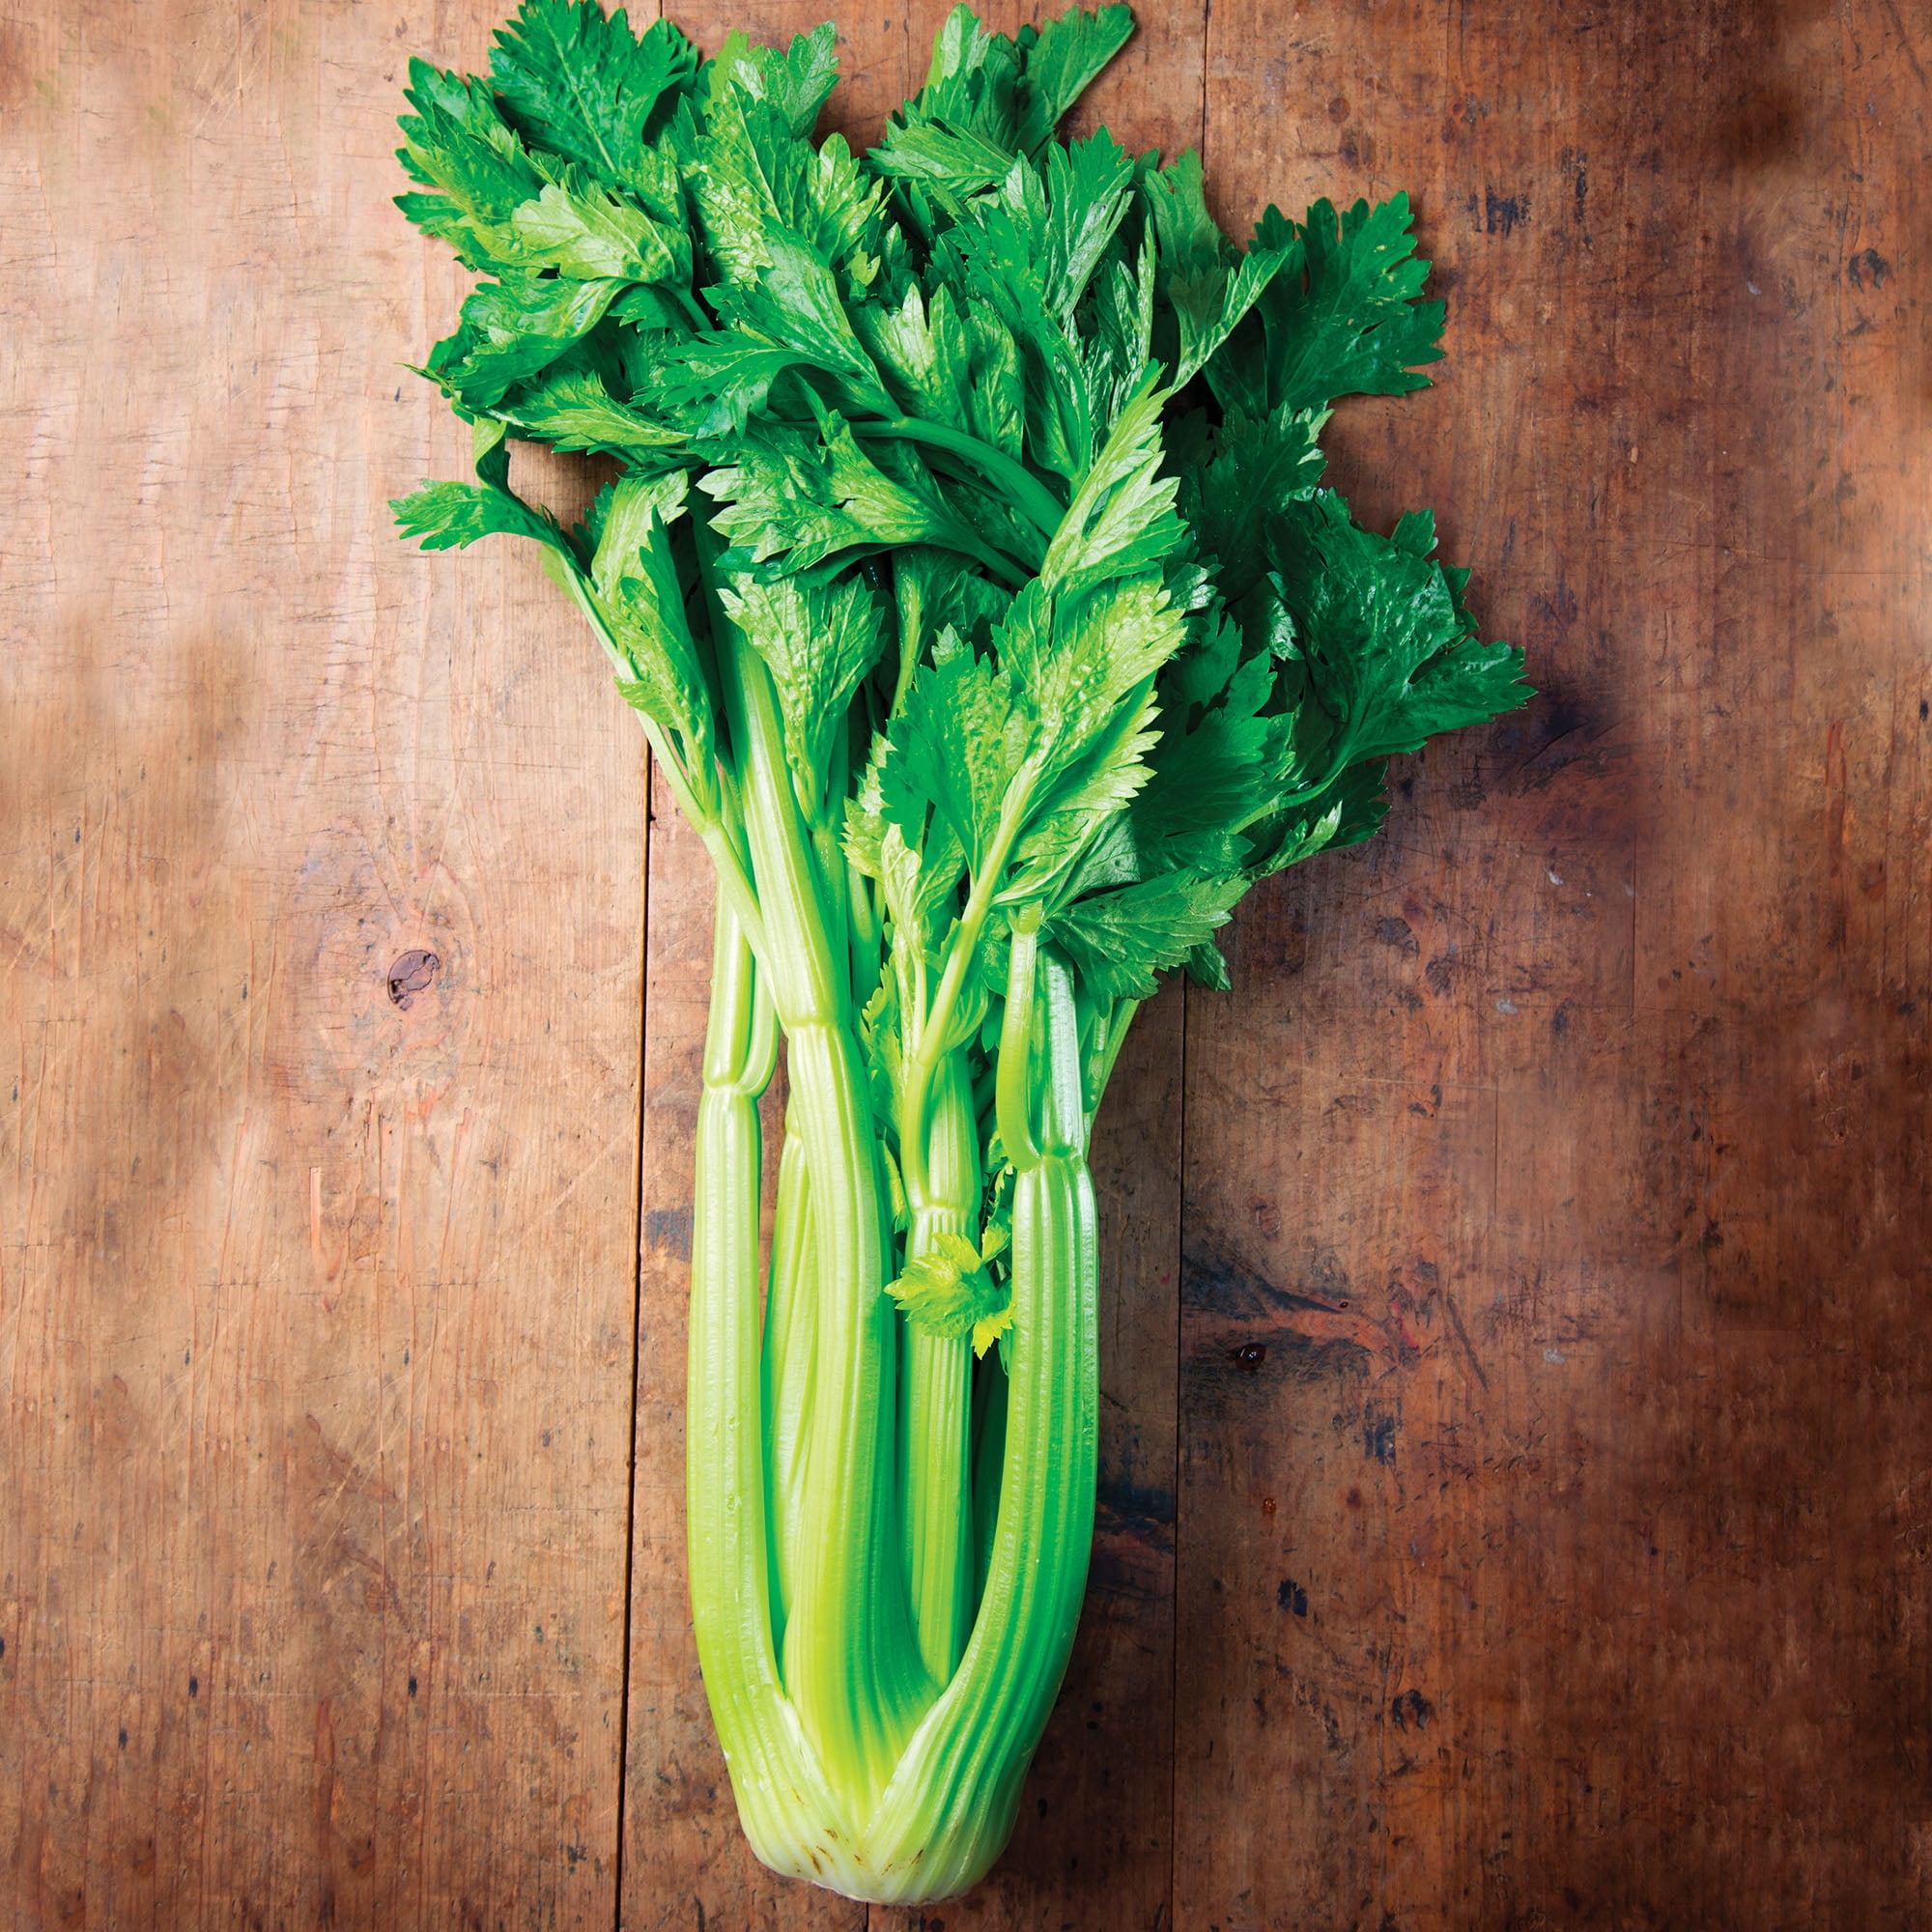 Vegetable Celery Golden Self Blanching Appx 2000 Seeds 